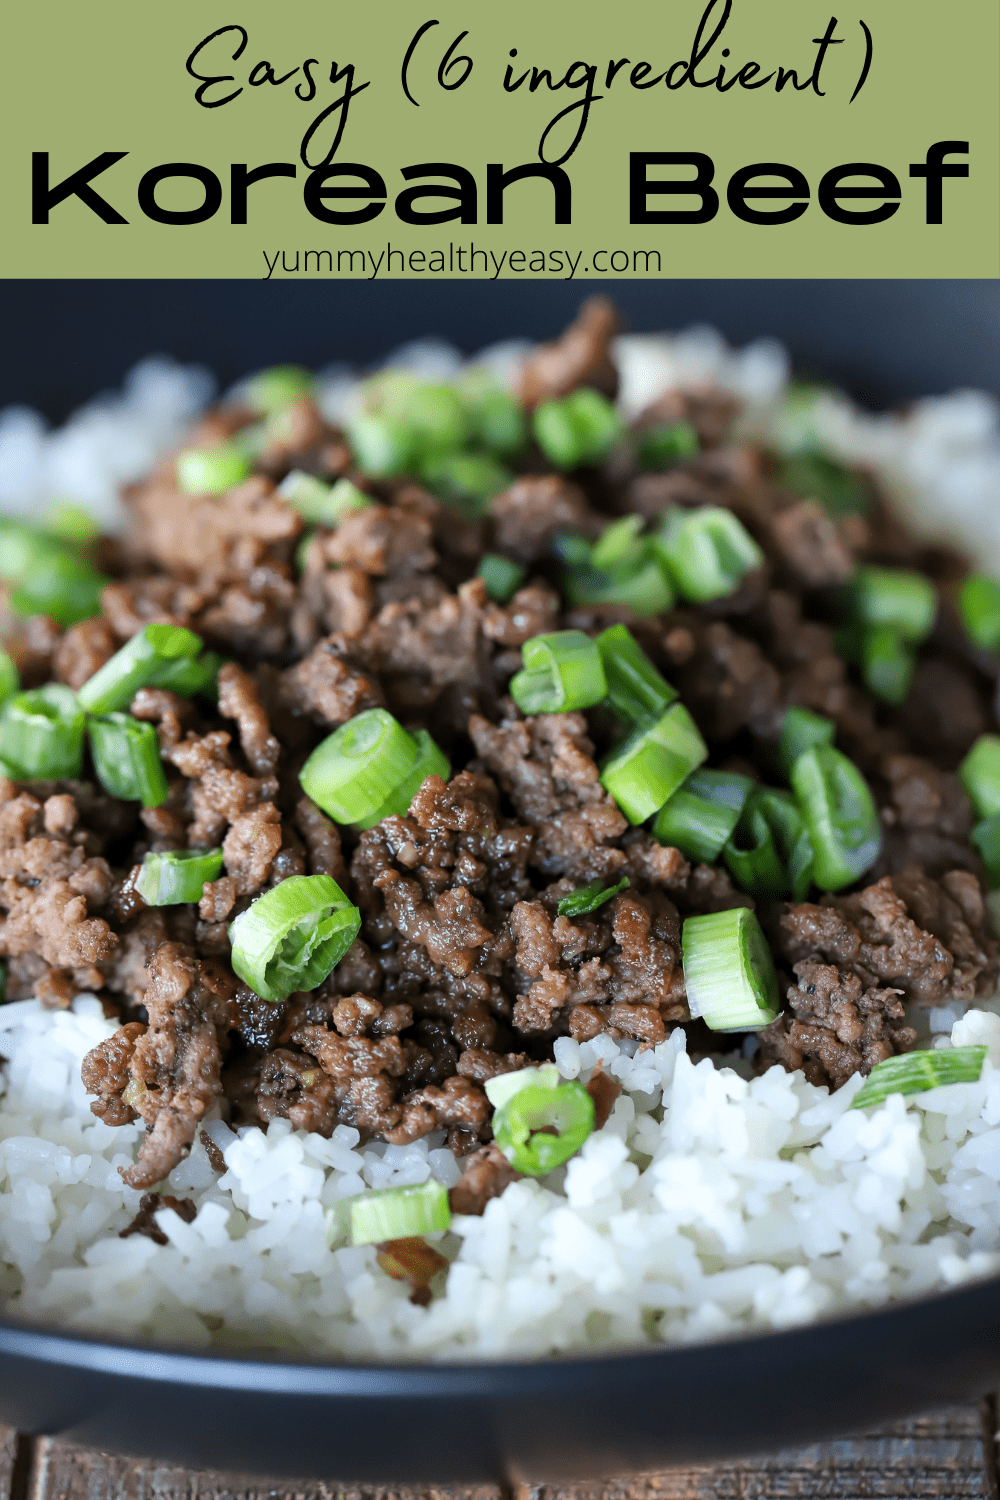 This is the most amazing Korean Beef Recipe that you only need a few ingredients to make. It's so easy! Serve it over rice and you have dinner done in under 30 minutes! Only SIX ingredients! #dinner #dinnerrecipe #recipe #beef #yummy #easy #yummyhealthyeasy via @jennikolaus